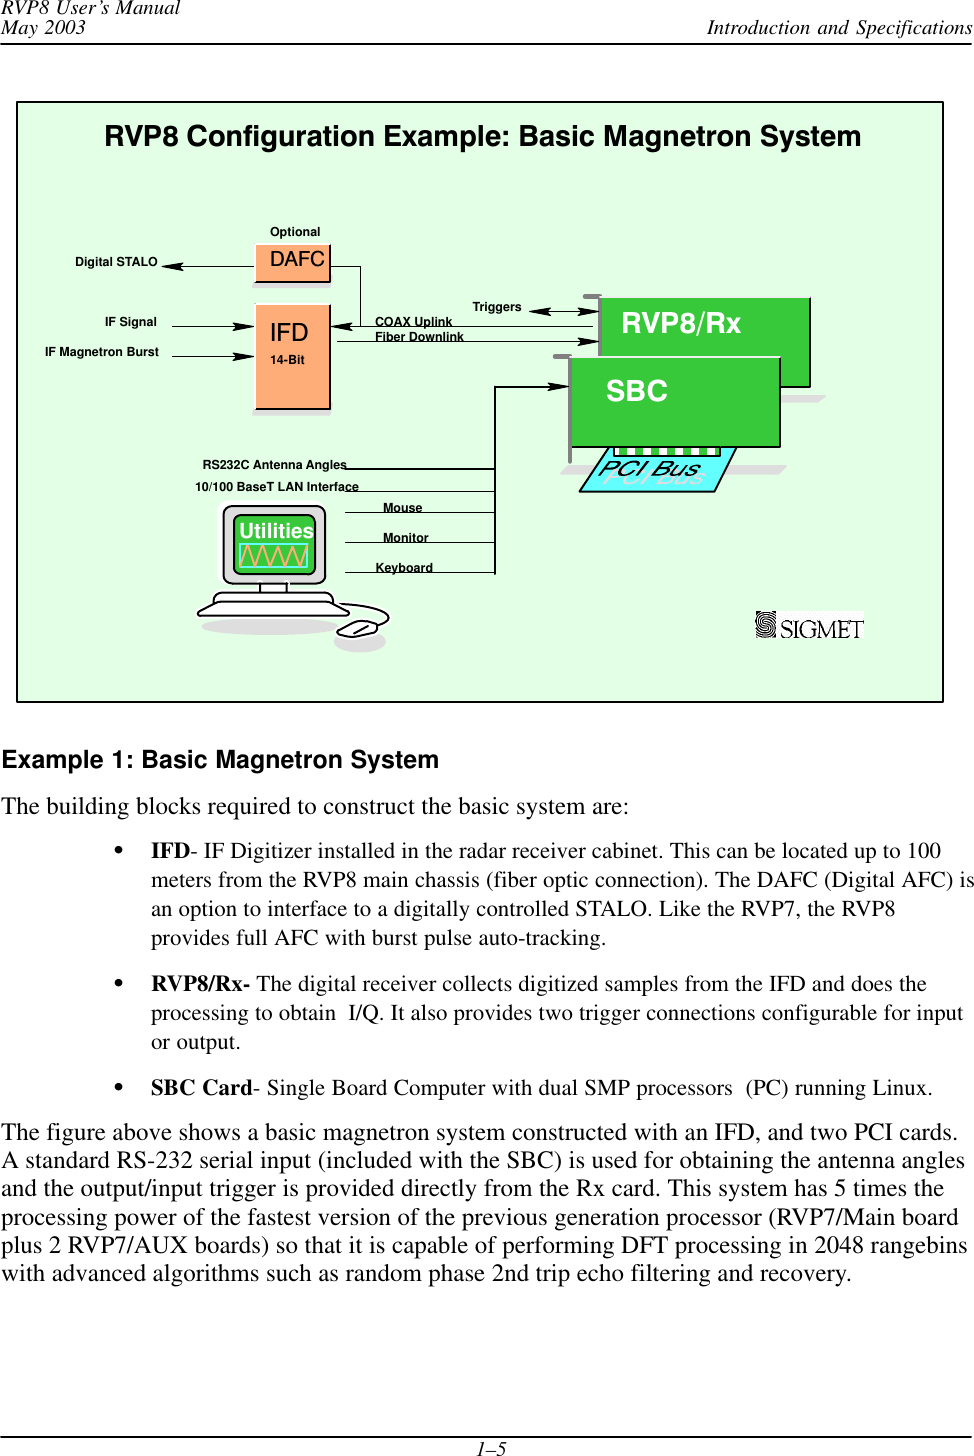 Introduction and SpecificationsRVP8 User’s ManualMay 20031–5KeyboardMouseMonitor10/100 BaseT LAN InterfaceIFD Fiber DownlinkCOAX UplinkRS232C Antenna AnglesRVP8 Configuration Example: Basic Magnetron SystemTriggersIF SignalIF Magnetron BurstDAFCDigital STALOOptionalUtilities14-BitSBCRVP8/RxExample 1: Basic Magnetron SystemThe building blocks required to construct the basic system are:IFD- IF Digitizer installed in the radar receiver cabinet. This can be located up to 100meters from the RVP8 main chassis (fiber optic connection). The DAFC (Digital AFC) isan option to interface to a digitally controlled STALO. Like the RVP7, the RVP8provides full AFC with burst pulse auto-tracking.RVP8/Rx- The digital receiver collects digitized samples from the IFD and does theprocessing to obtain  I/Q. It also provides two trigger connections configurable for inputor output.SBC Card- Single Board Computer with dual SMP processors  (PC) running Linux.The figure above shows a basic magnetron system constructed with an IFD, and two PCI cards.A standard RS-232 serial input (included with the SBC) is used for obtaining the antenna anglesand the output/input trigger is provided directly from the Rx card. This system has 5 times theprocessing power of the fastest version of the previous generation processor (RVP7/Main boardplus 2 RVP7/AUX boards) so that it is capable of performing DFT processing in 2048 rangebinswith advanced algorithms such as random phase 2nd trip echo filtering and recovery.